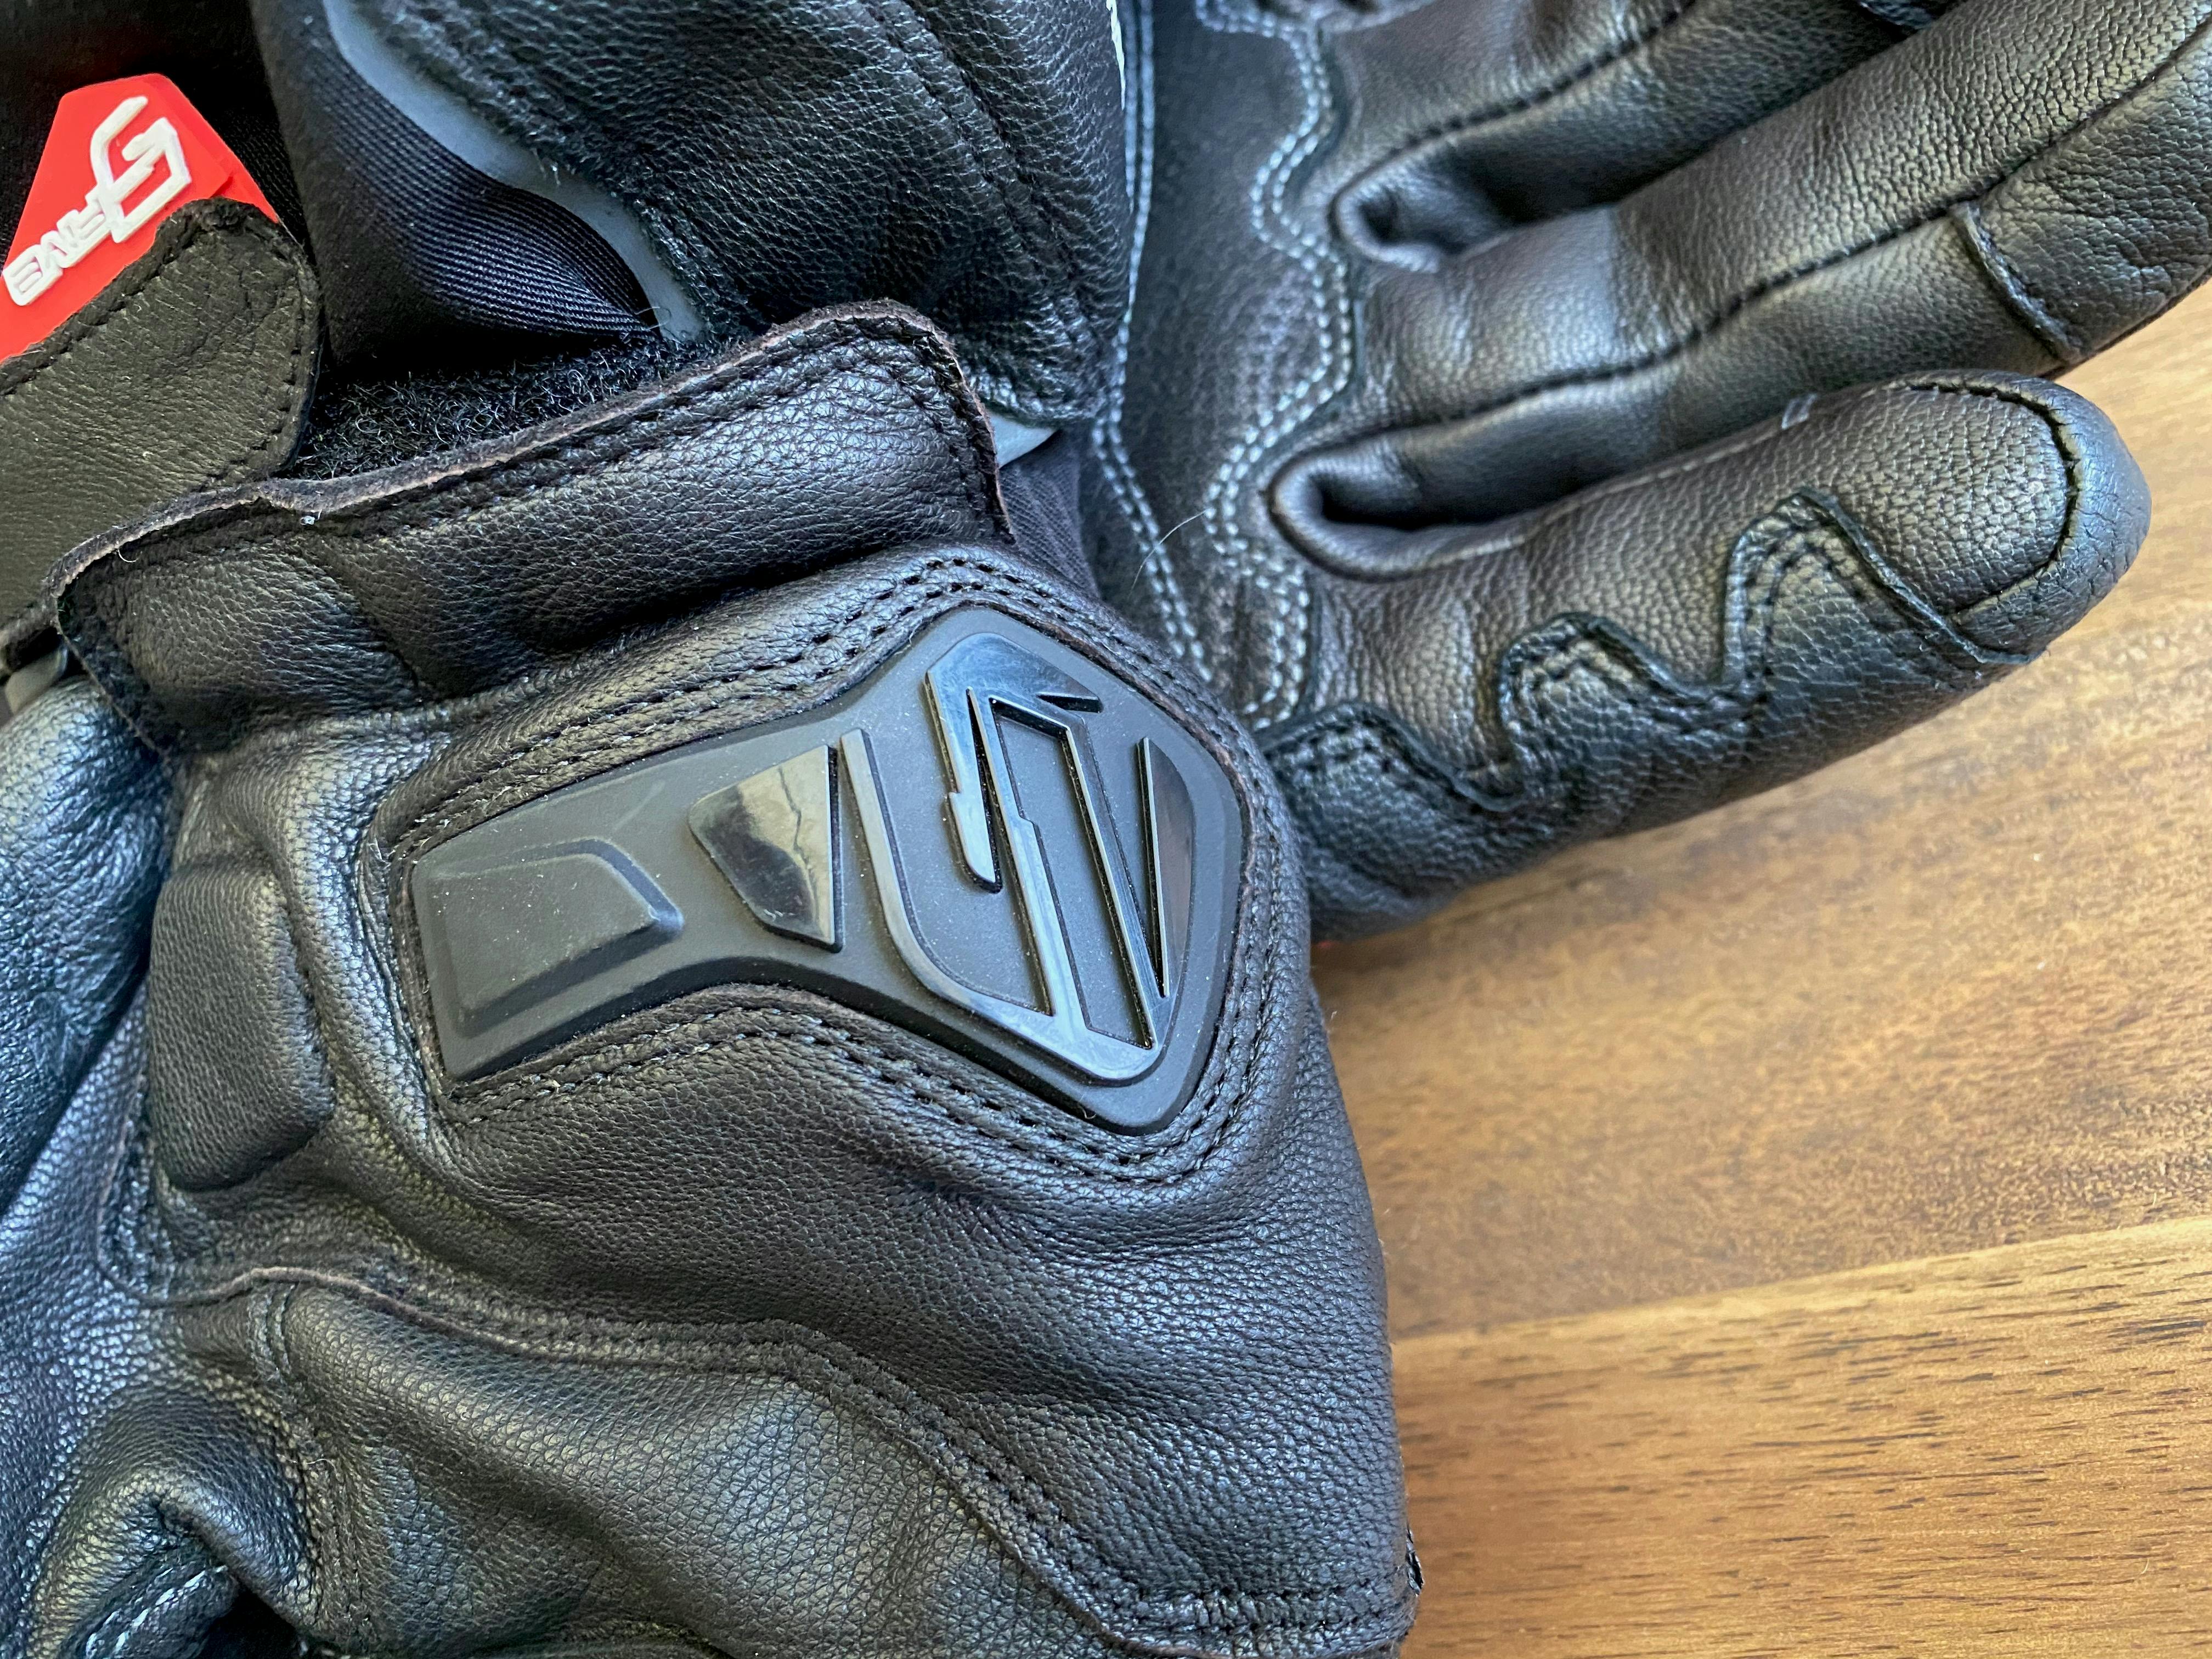 The palm armour on the Five HG-1 heated glove